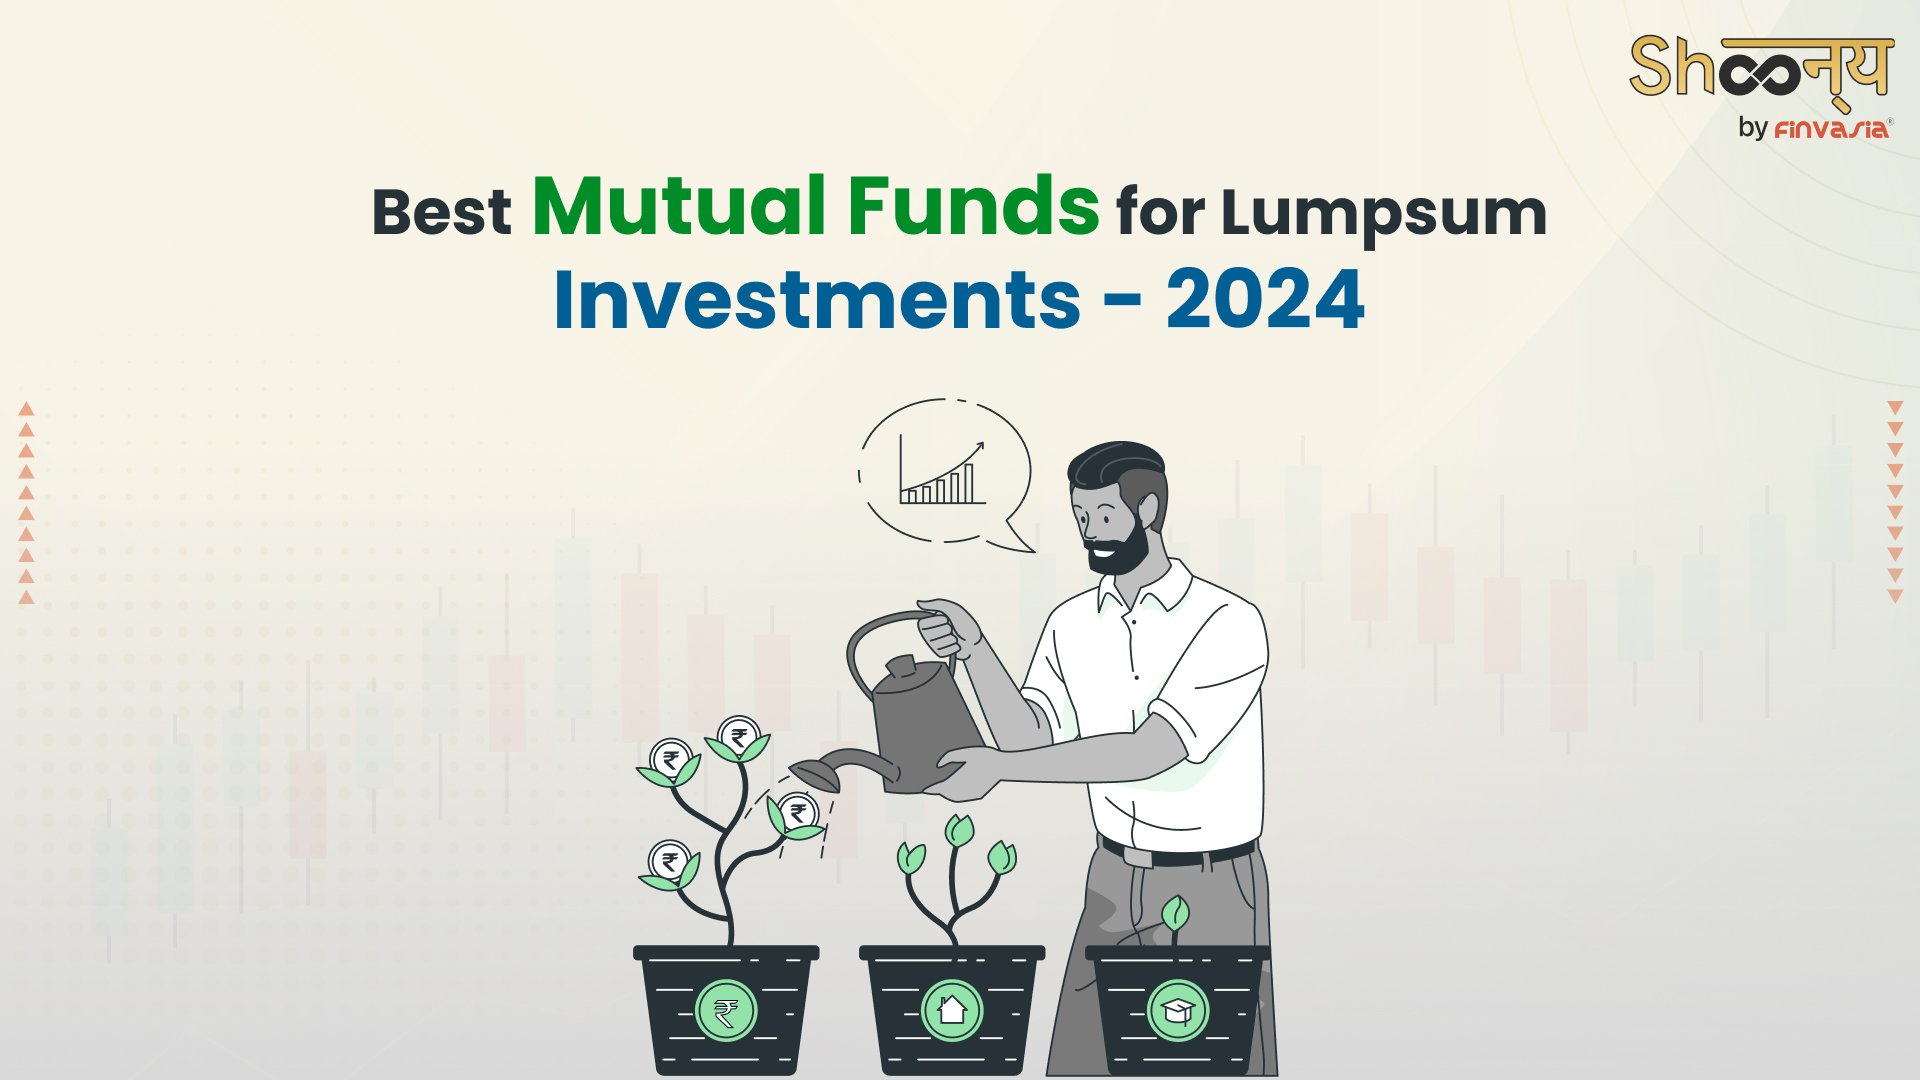 Best Mutual Funds for Lumpsum Investments 2024 : Top Strategies